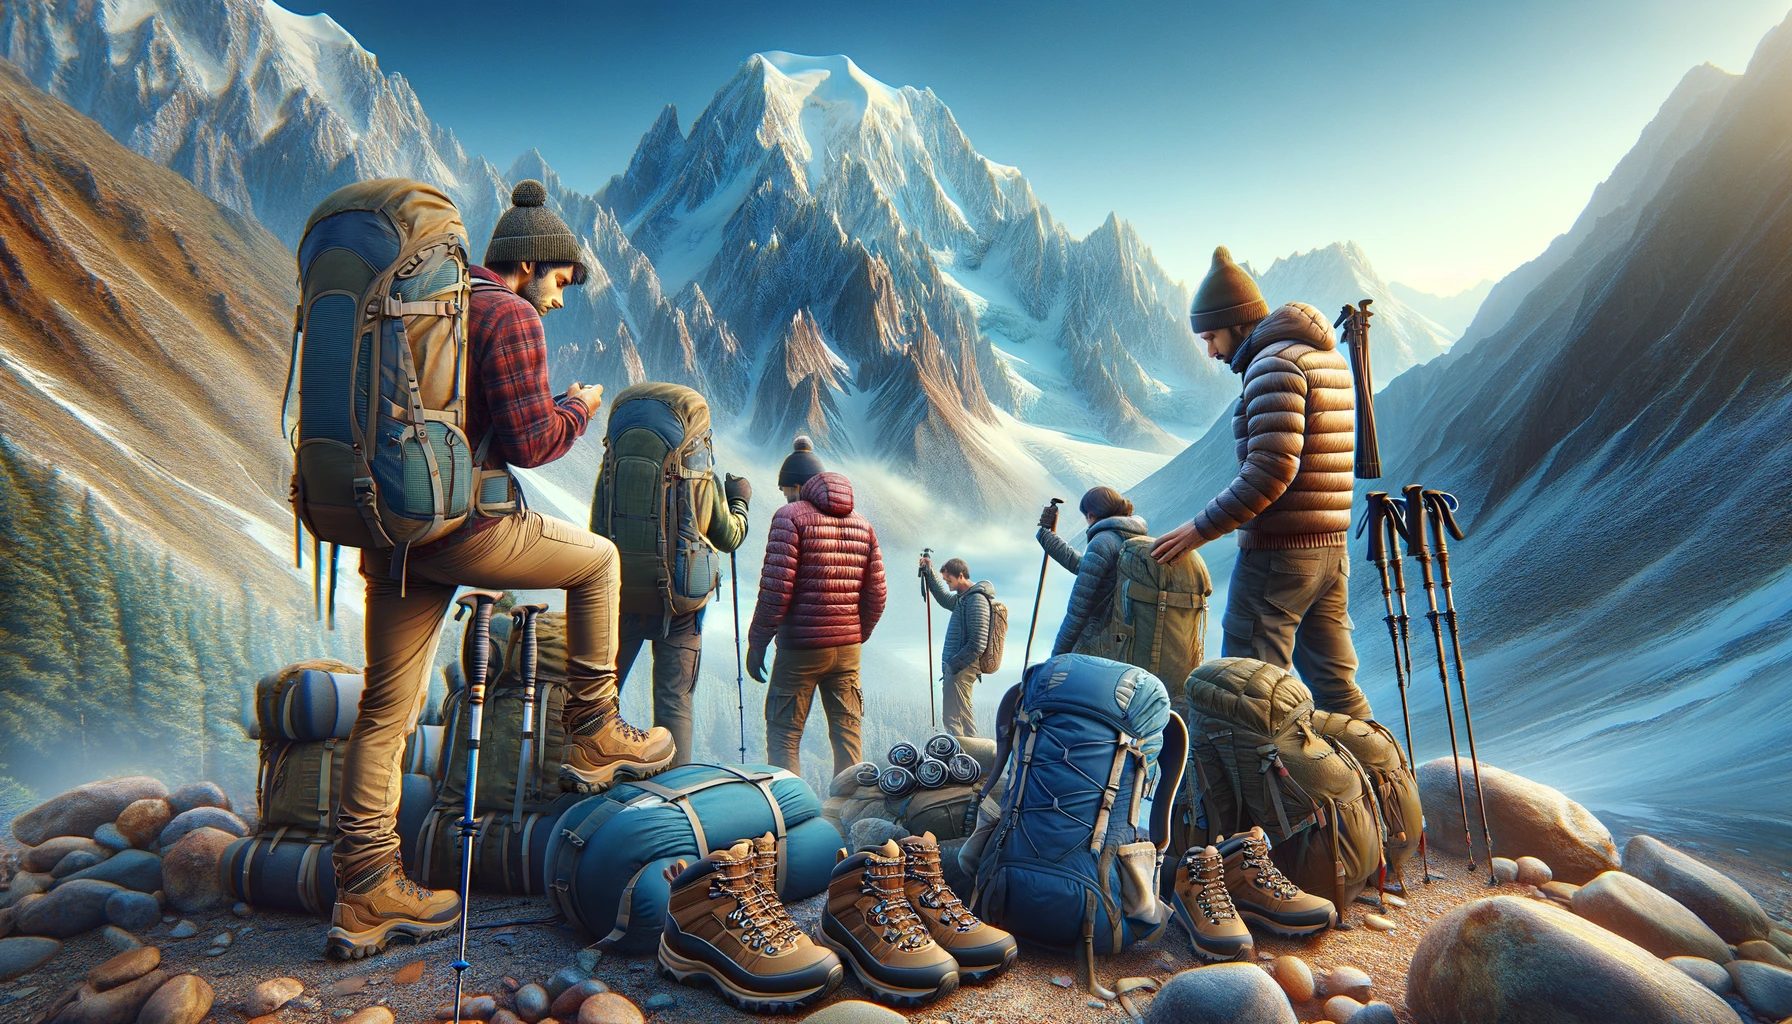 Hikers with gear facing snowy mountain peaks